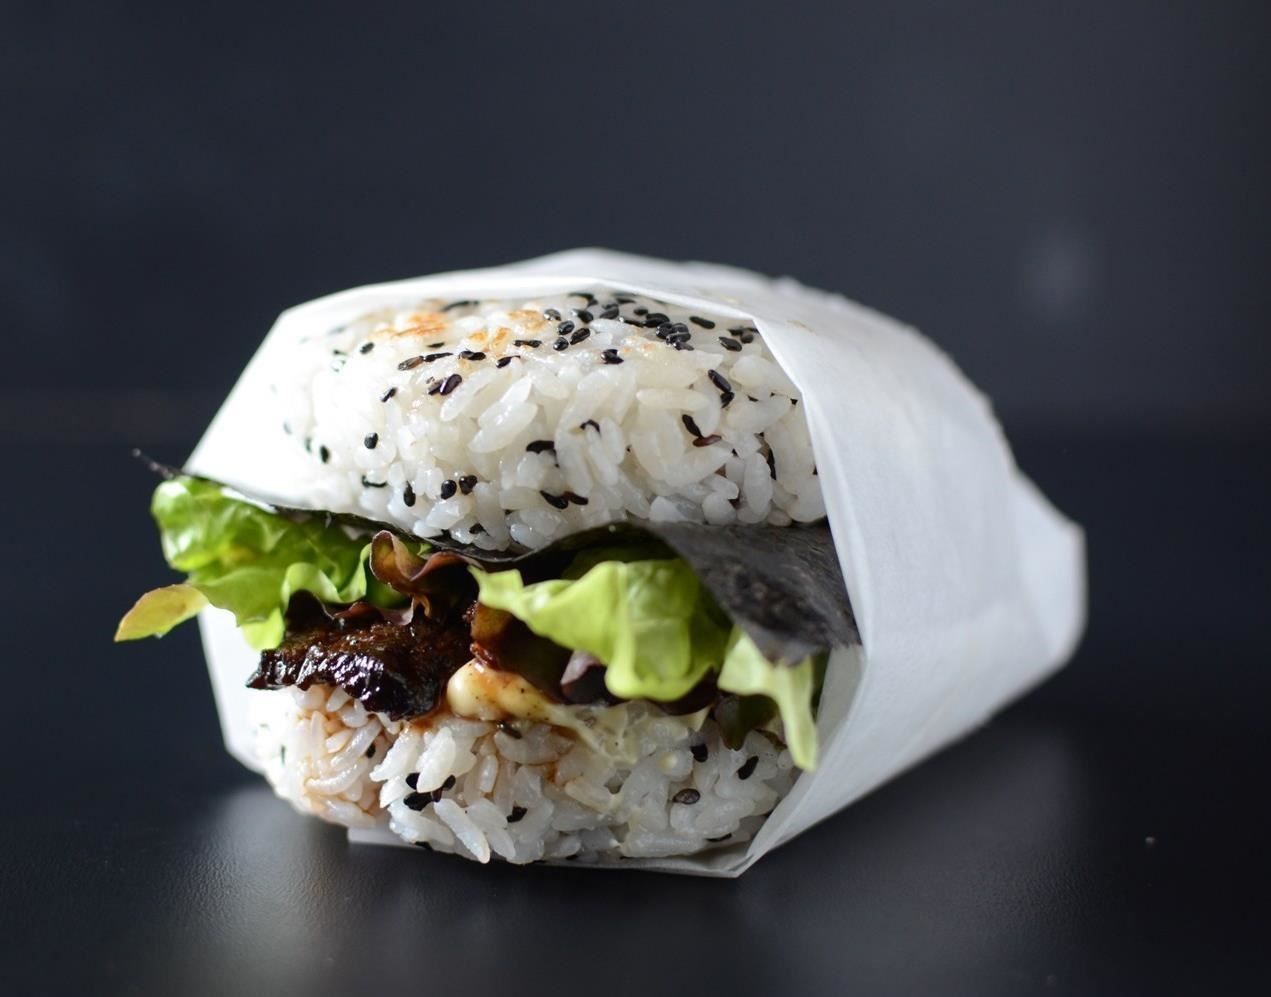 These Mouthwatering Sushi Burgers Are a Gift from the Lunch Gods